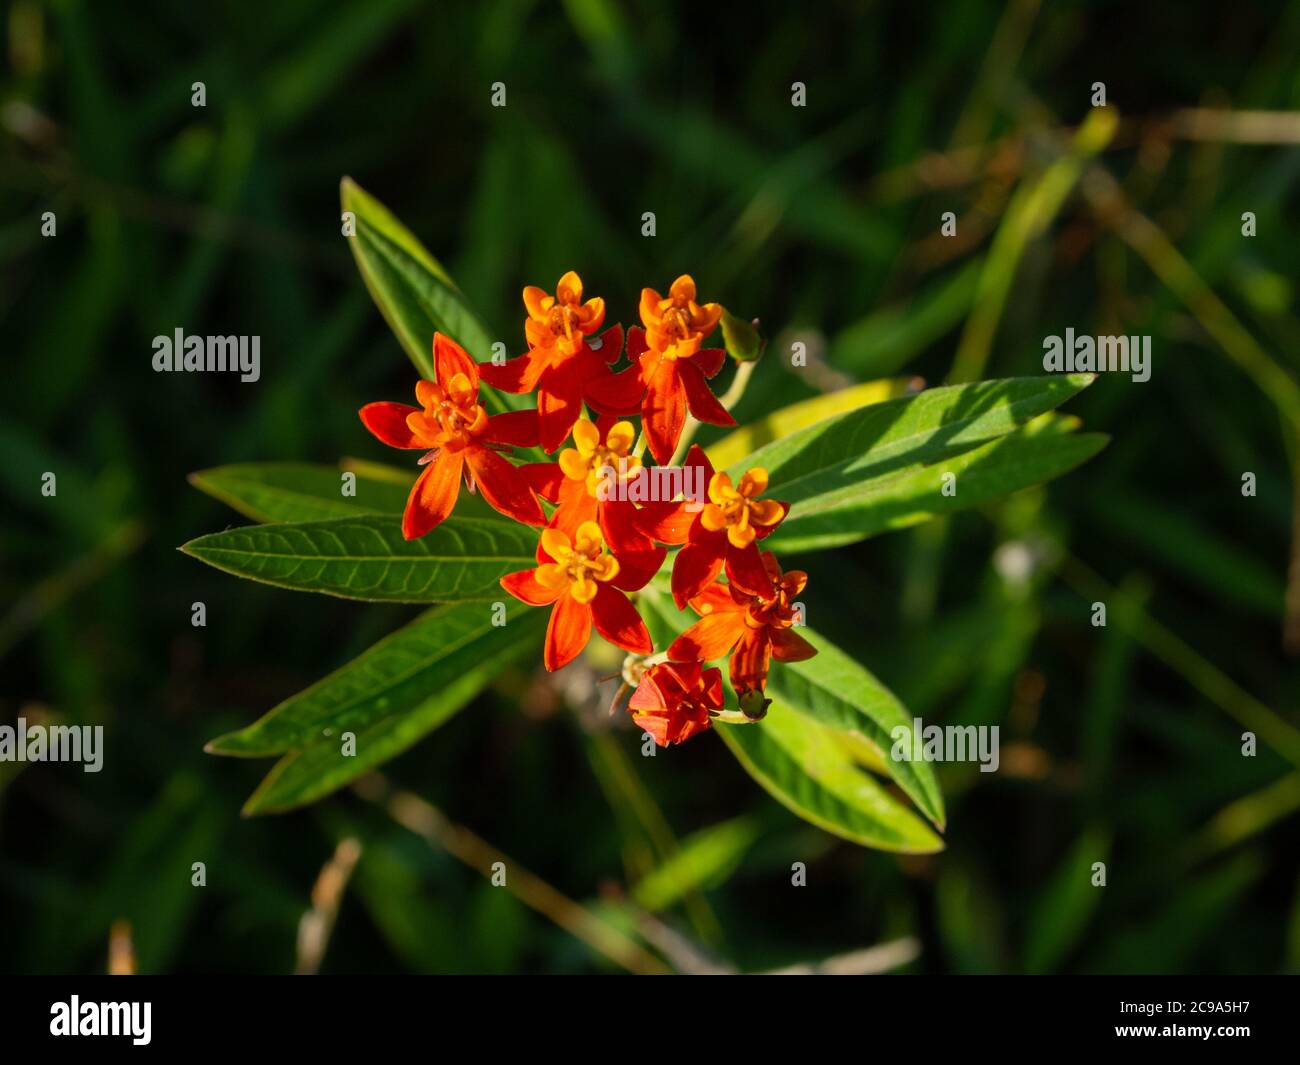 Bloodflower. Closeup beautiful and exotic flowers with yellow and red petals of Asclepias Curassavica Stock Photo